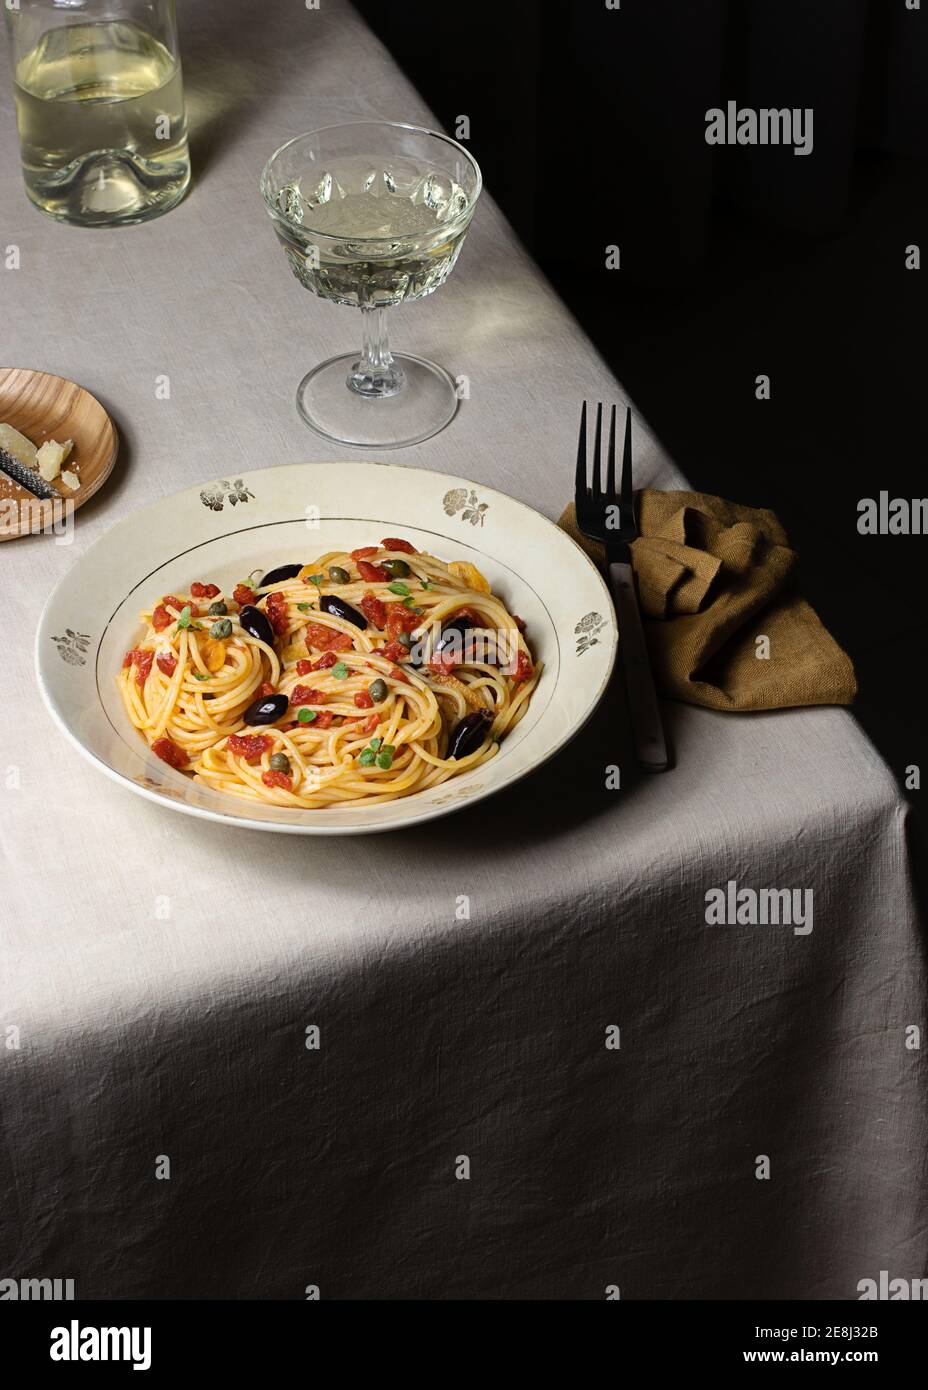 Spaghetti alla Puttanesca server with glass oh white wine placed on table with napkin Stock Photo